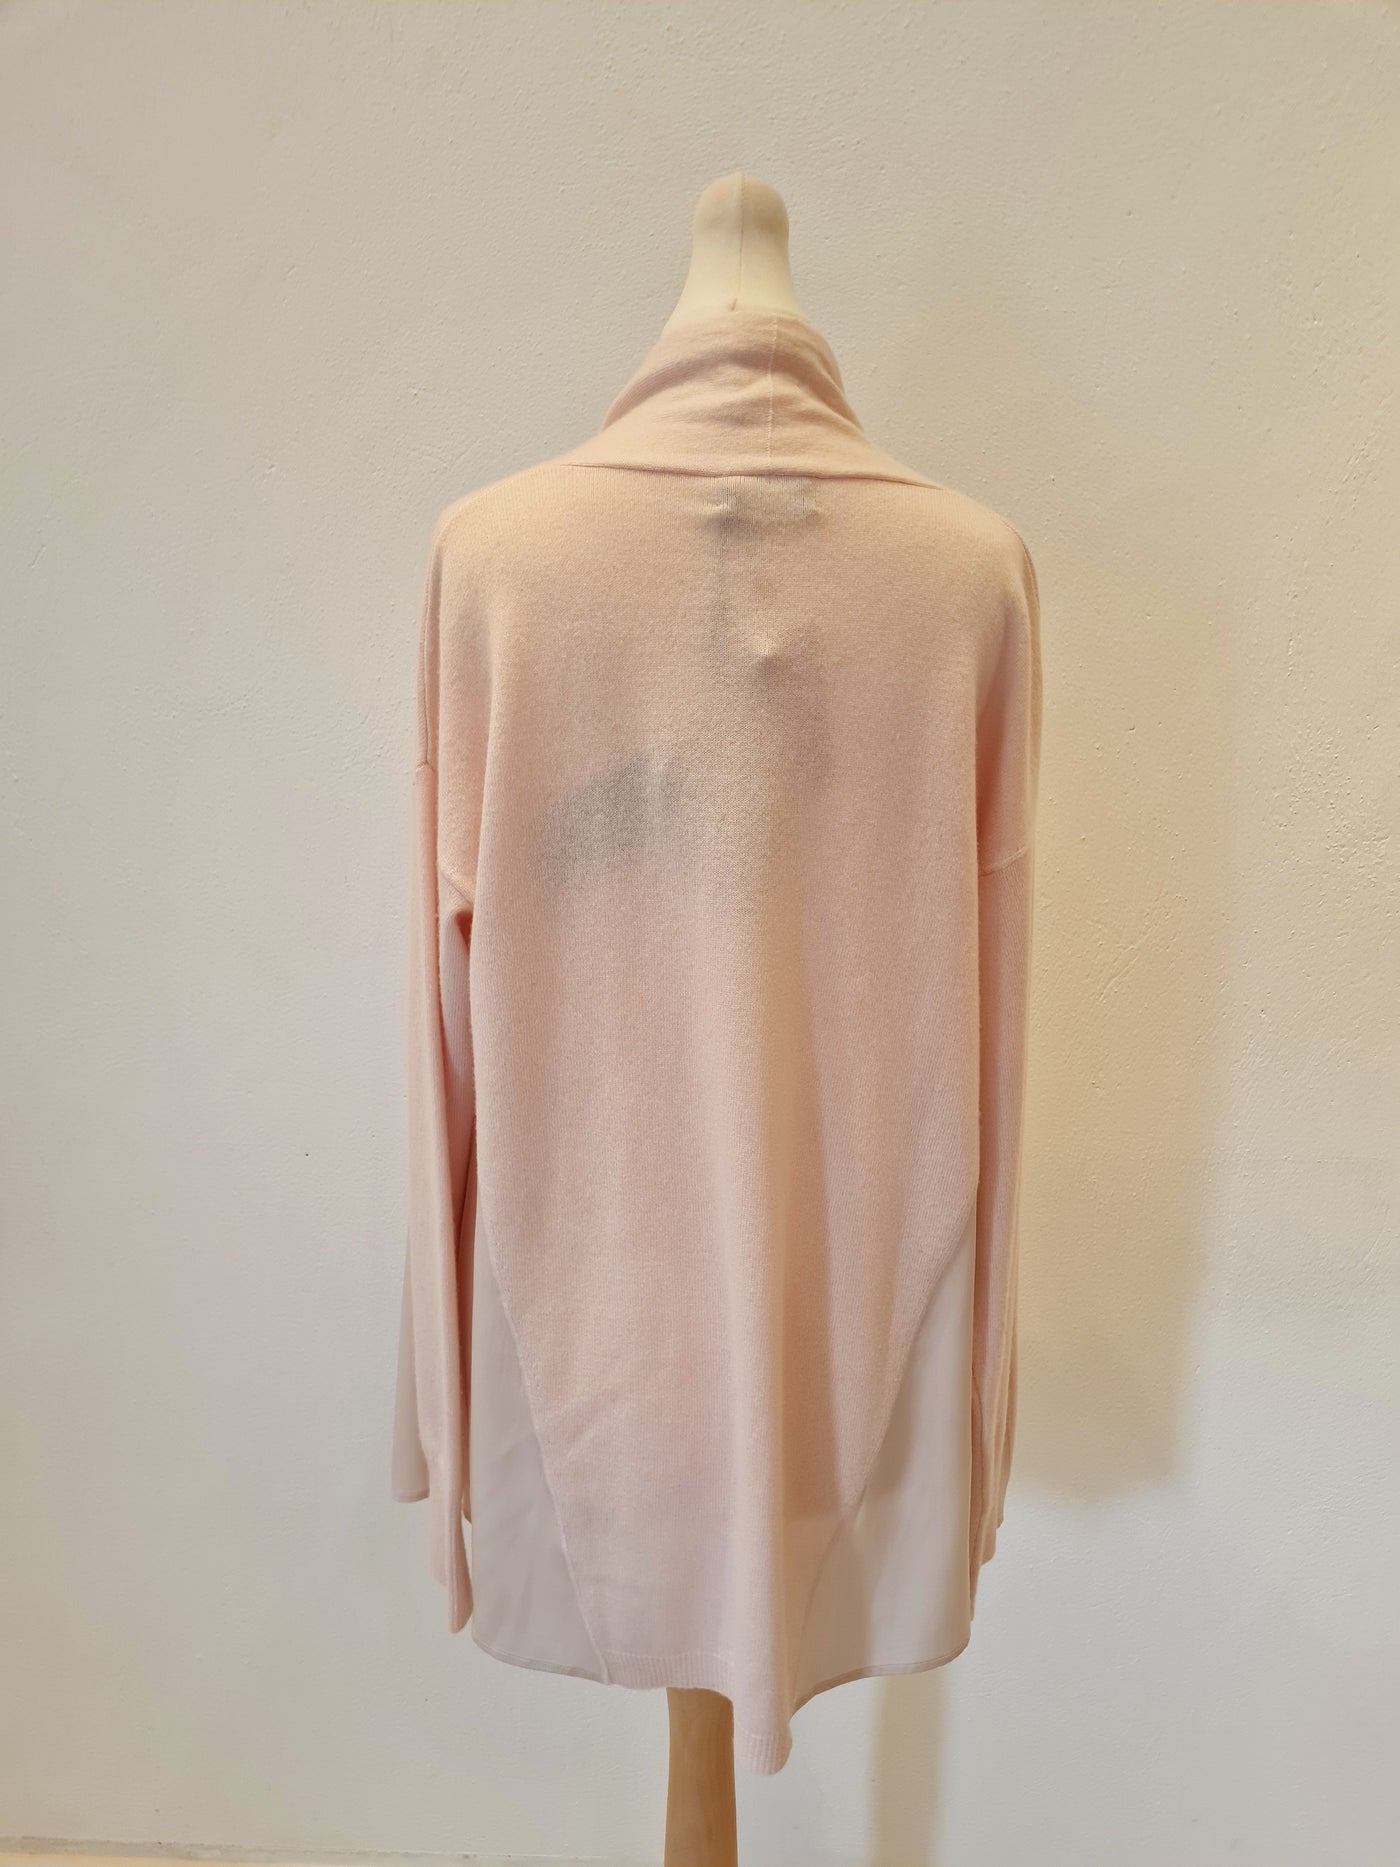 Repeat Pink Cashmere Cardigan New